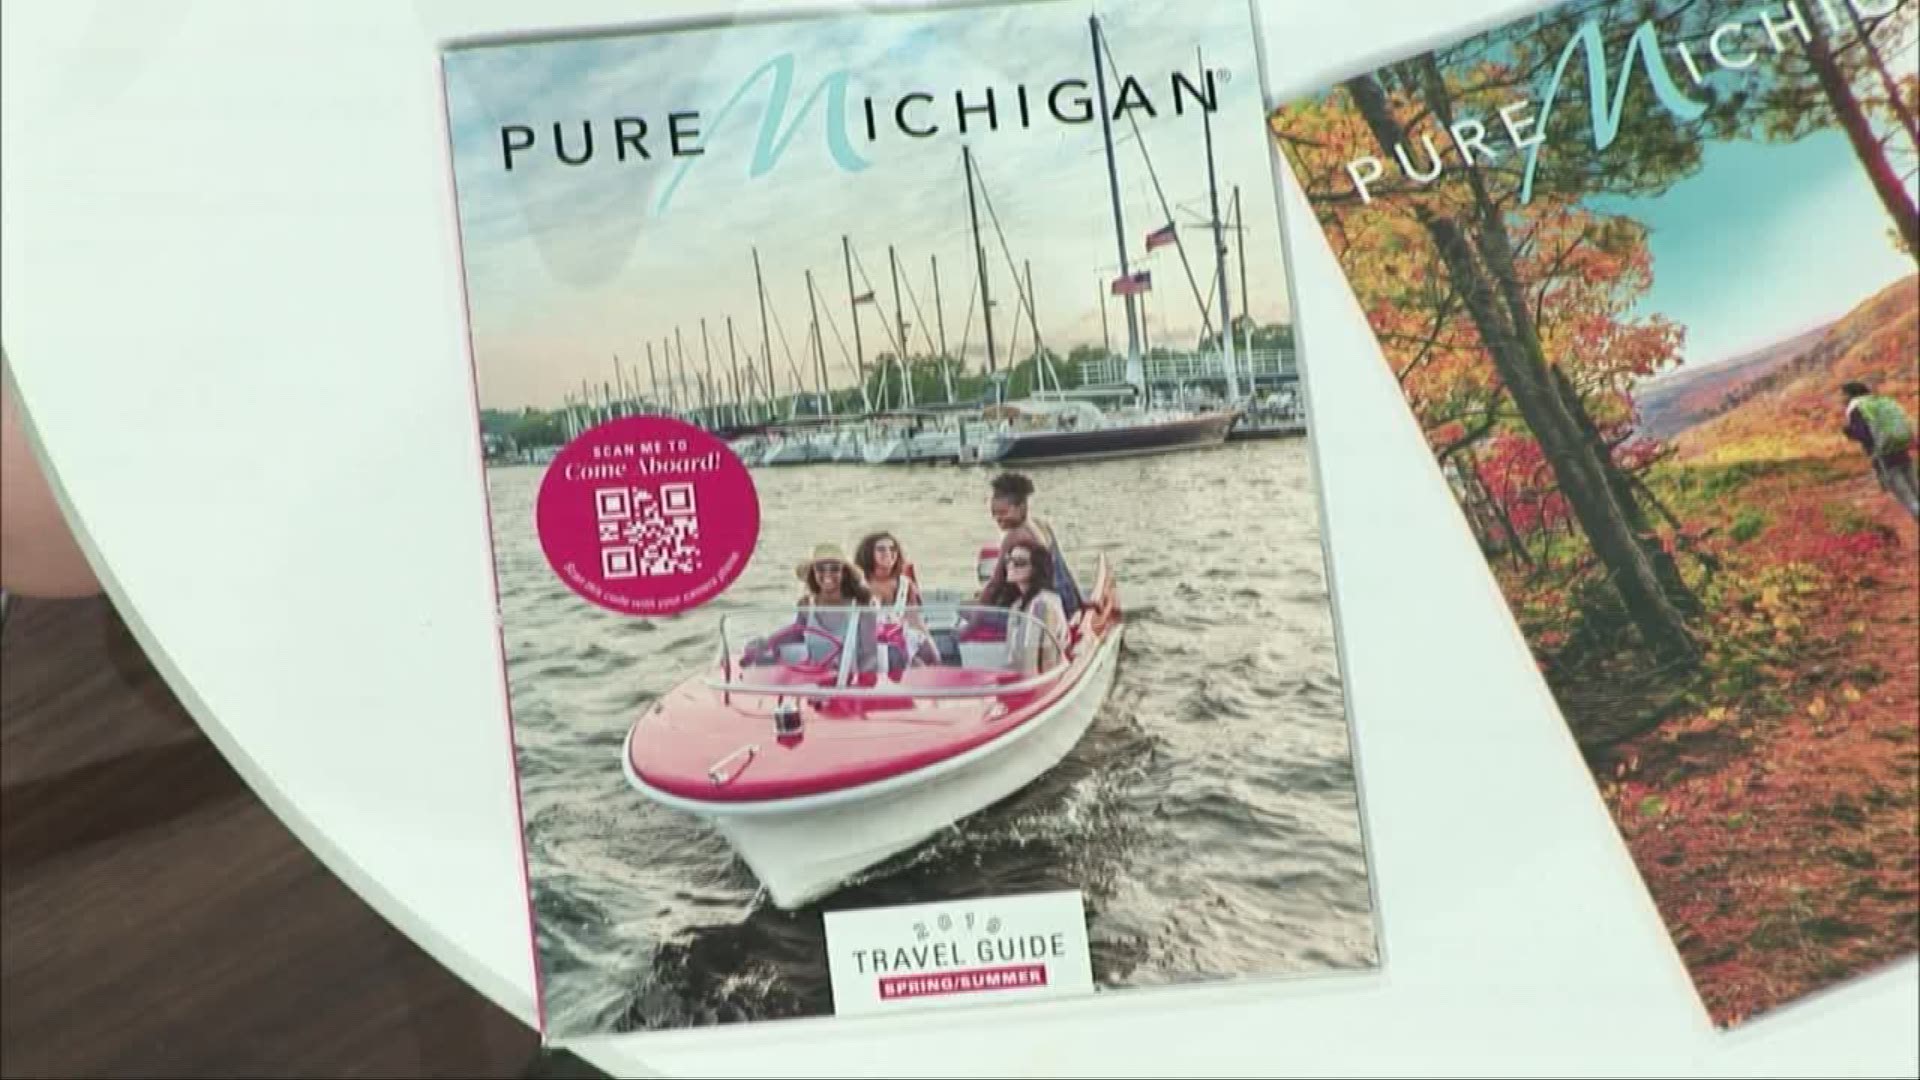 Michigan is full of hidden gems. Now is the time to explore them.